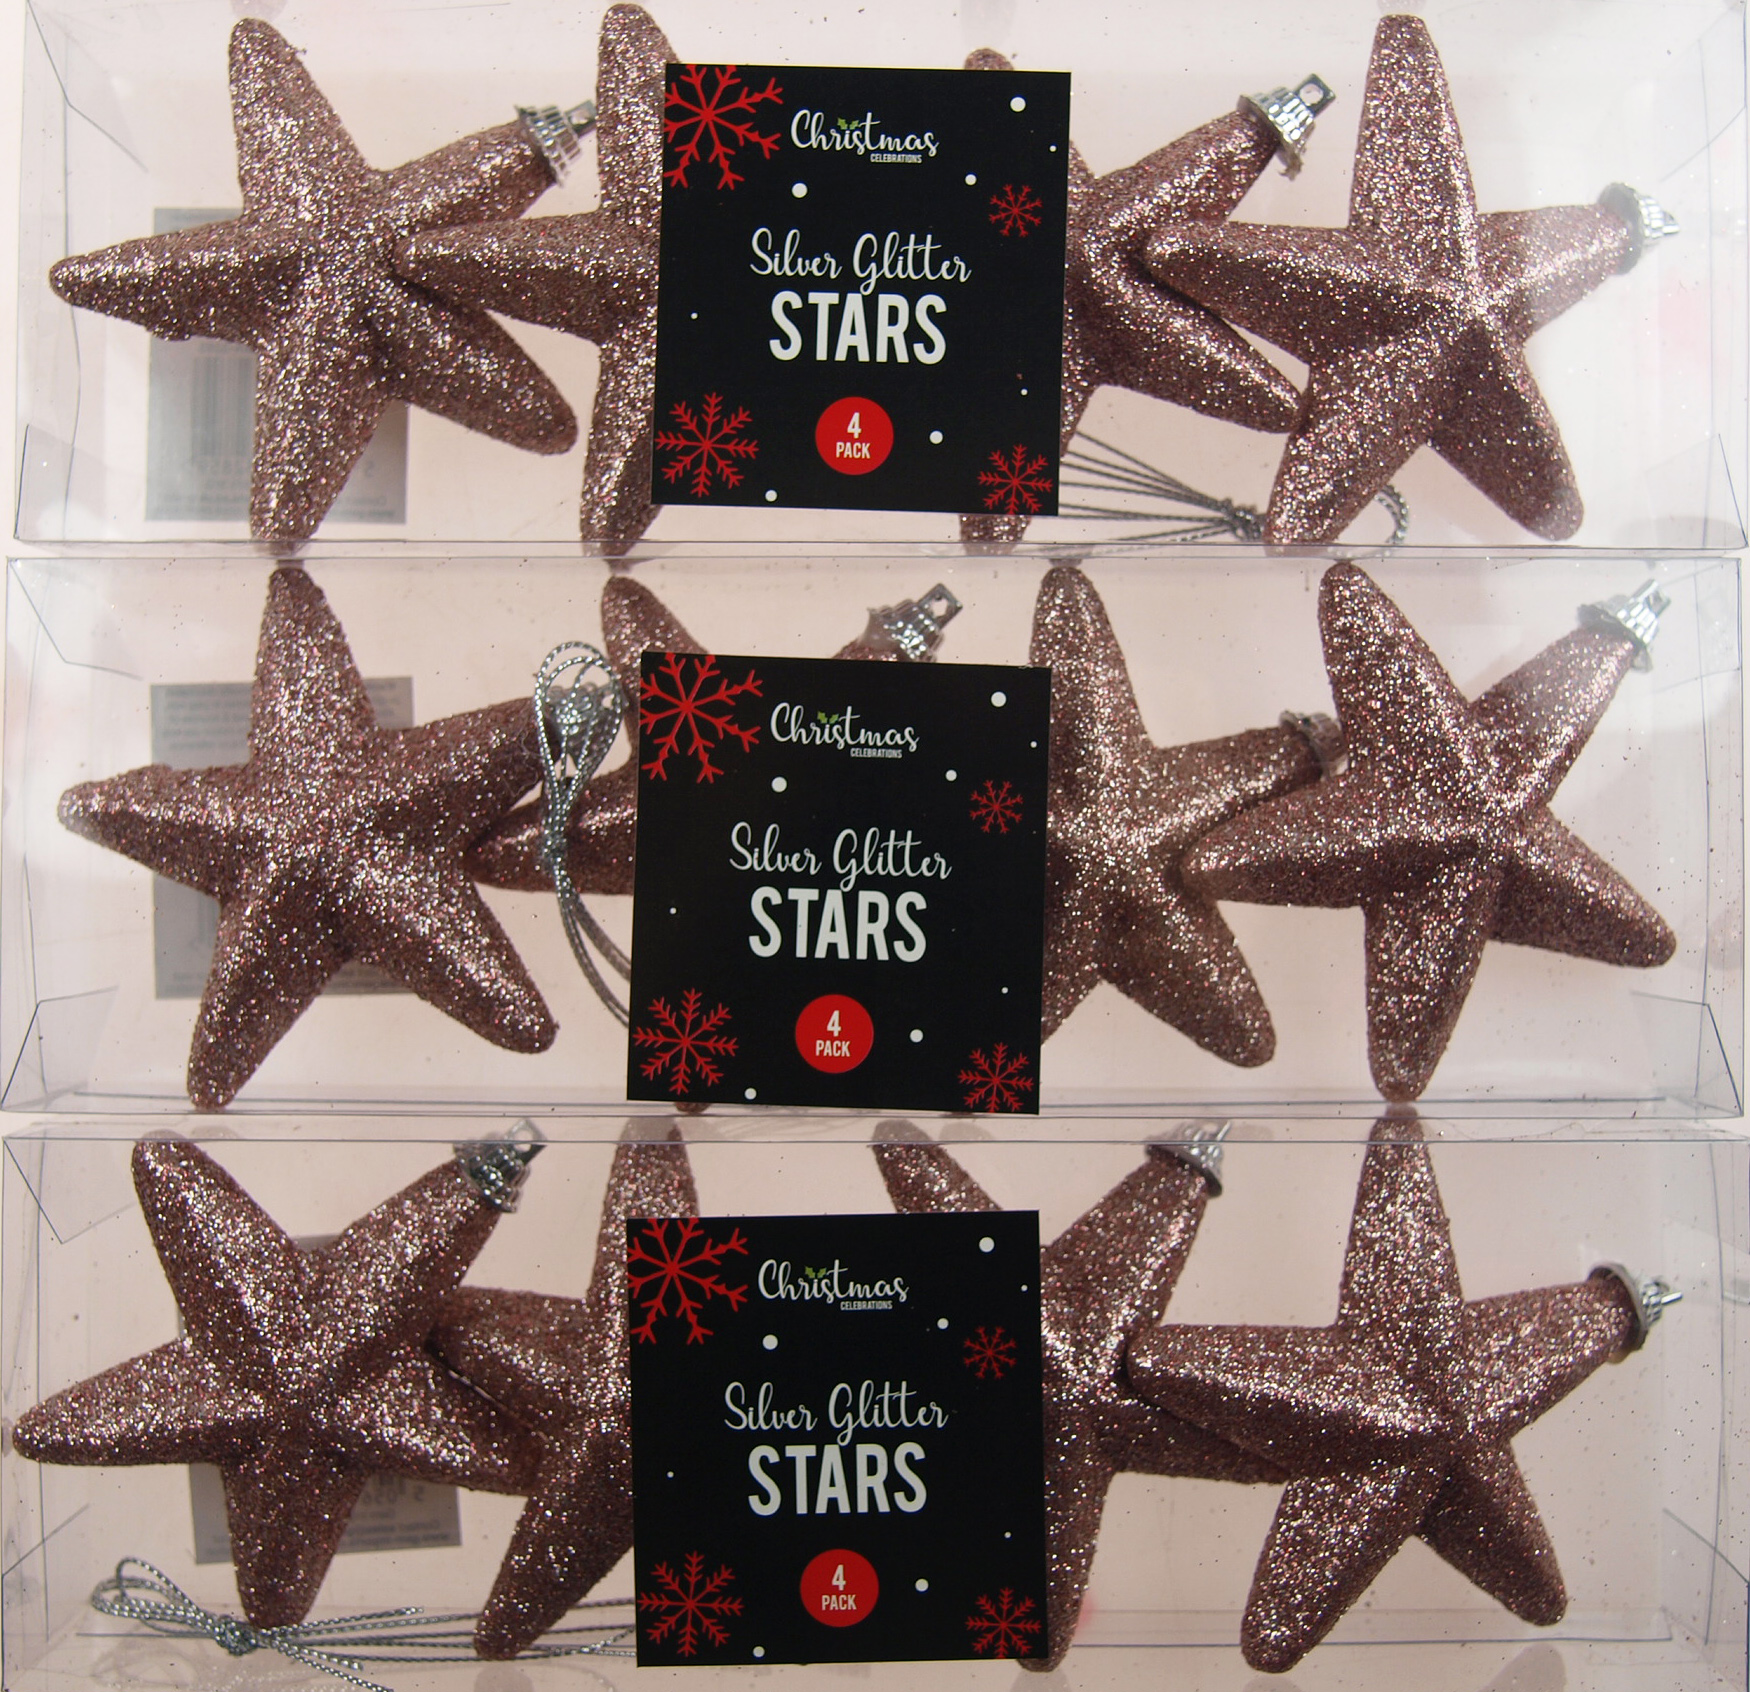 Rose Gold Glitter Star Baubles - Christmas Tree Decoration (Set of 12)